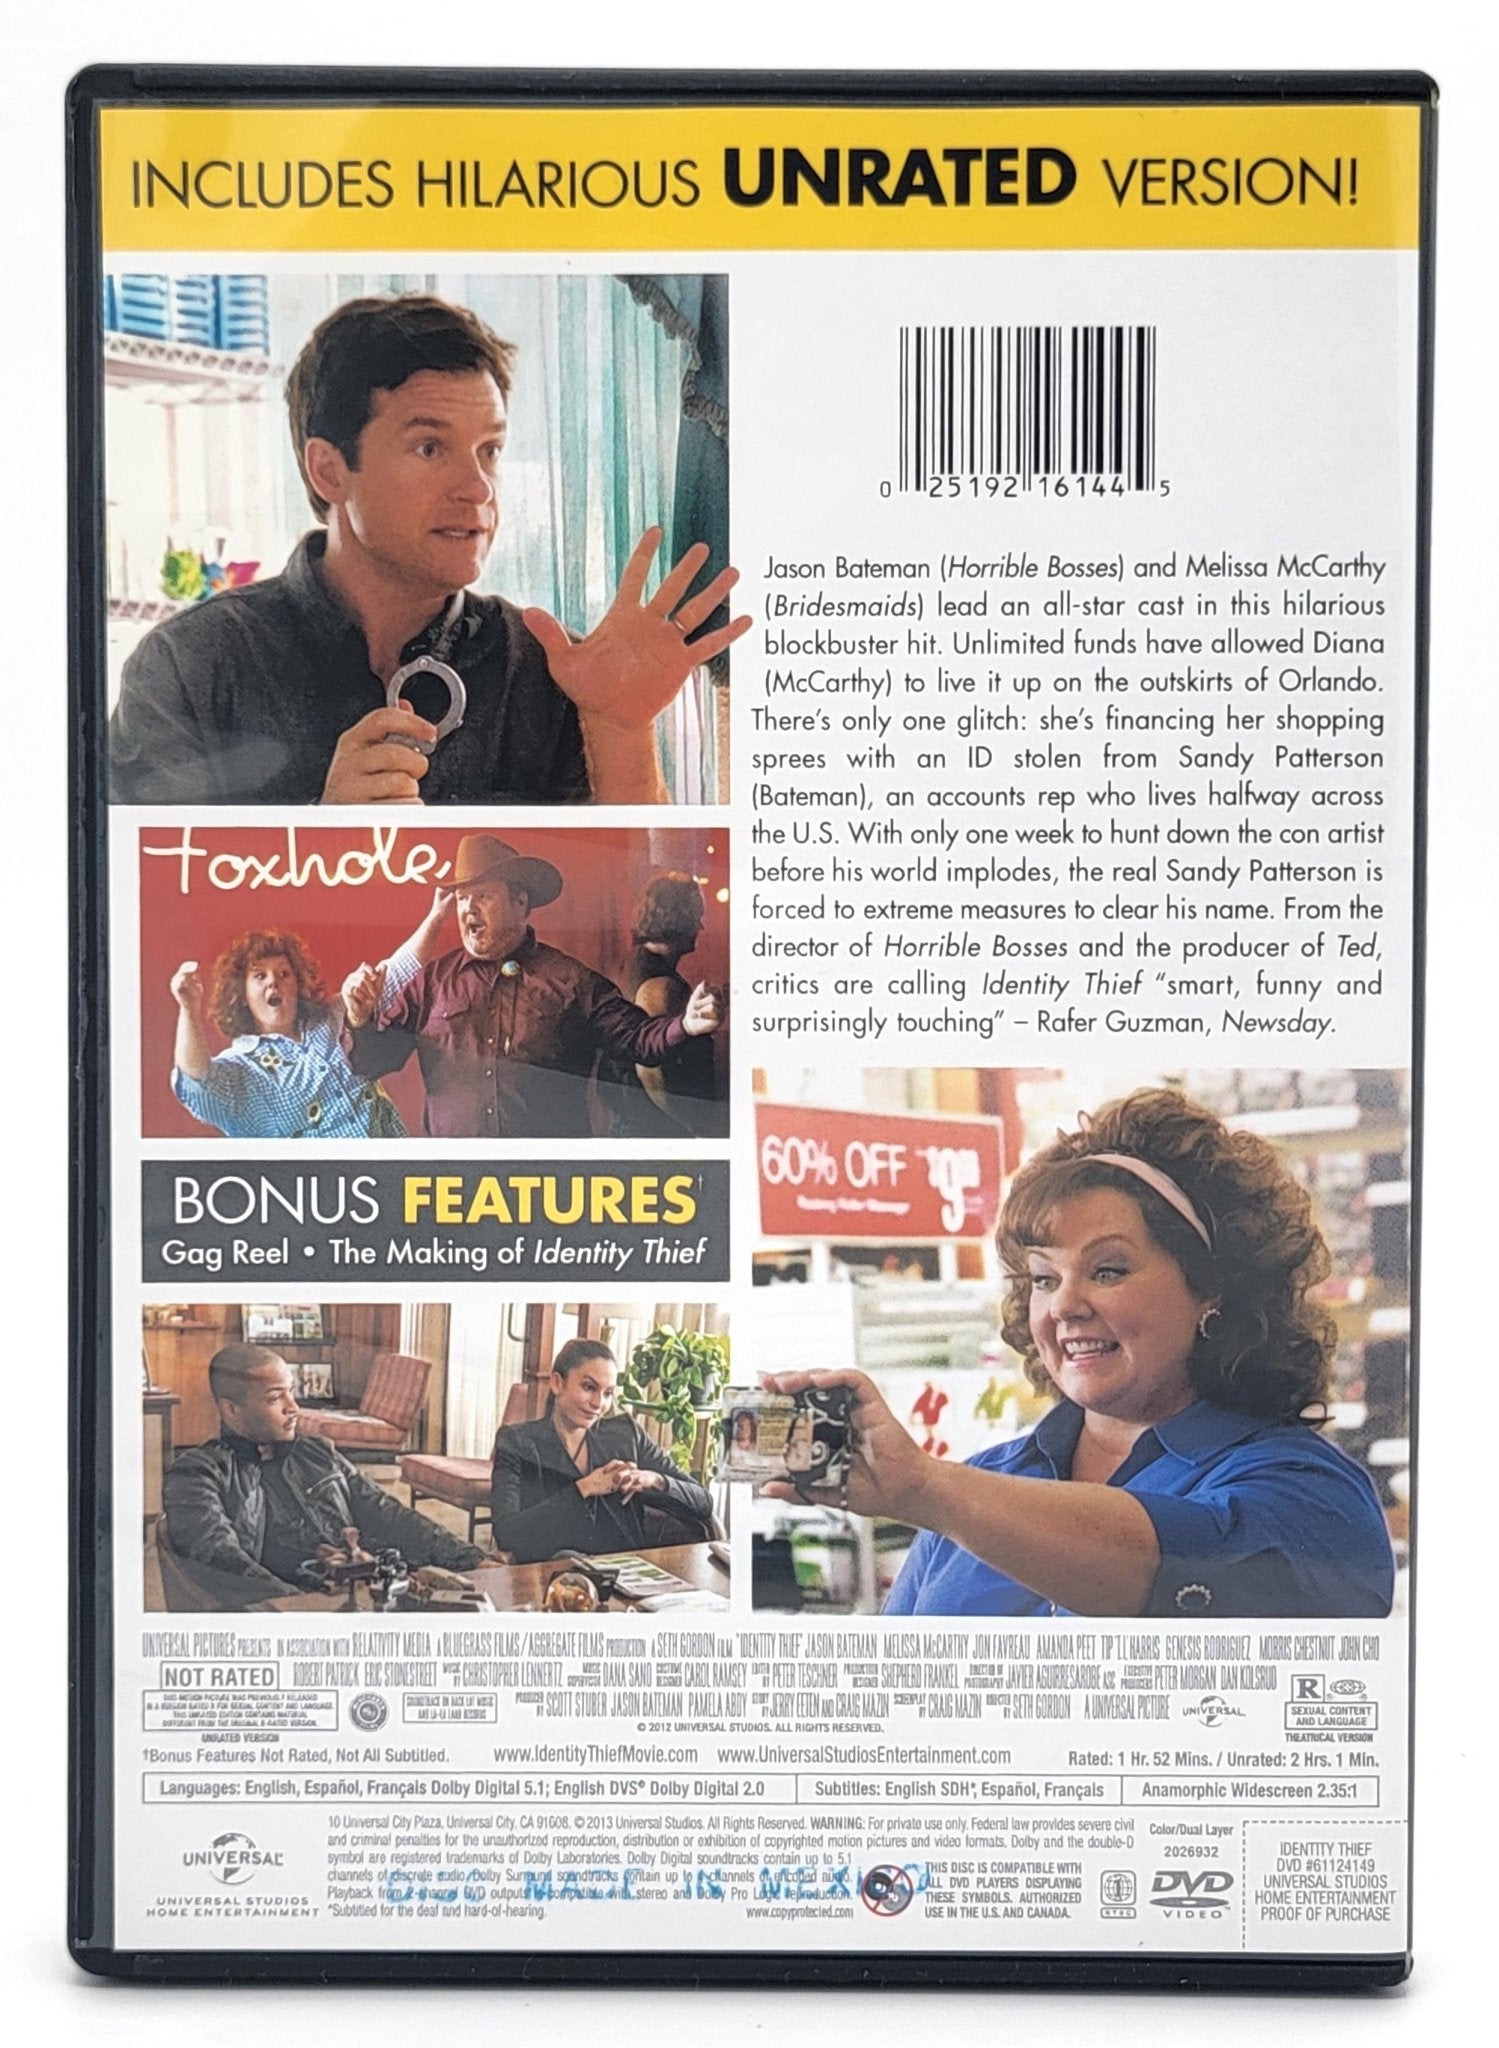 ‎ Universal Pictures Home Entertainment - Identity Thief | DVD | Unrated Edition - Widescreen - DVD - Steady Bunny Shop